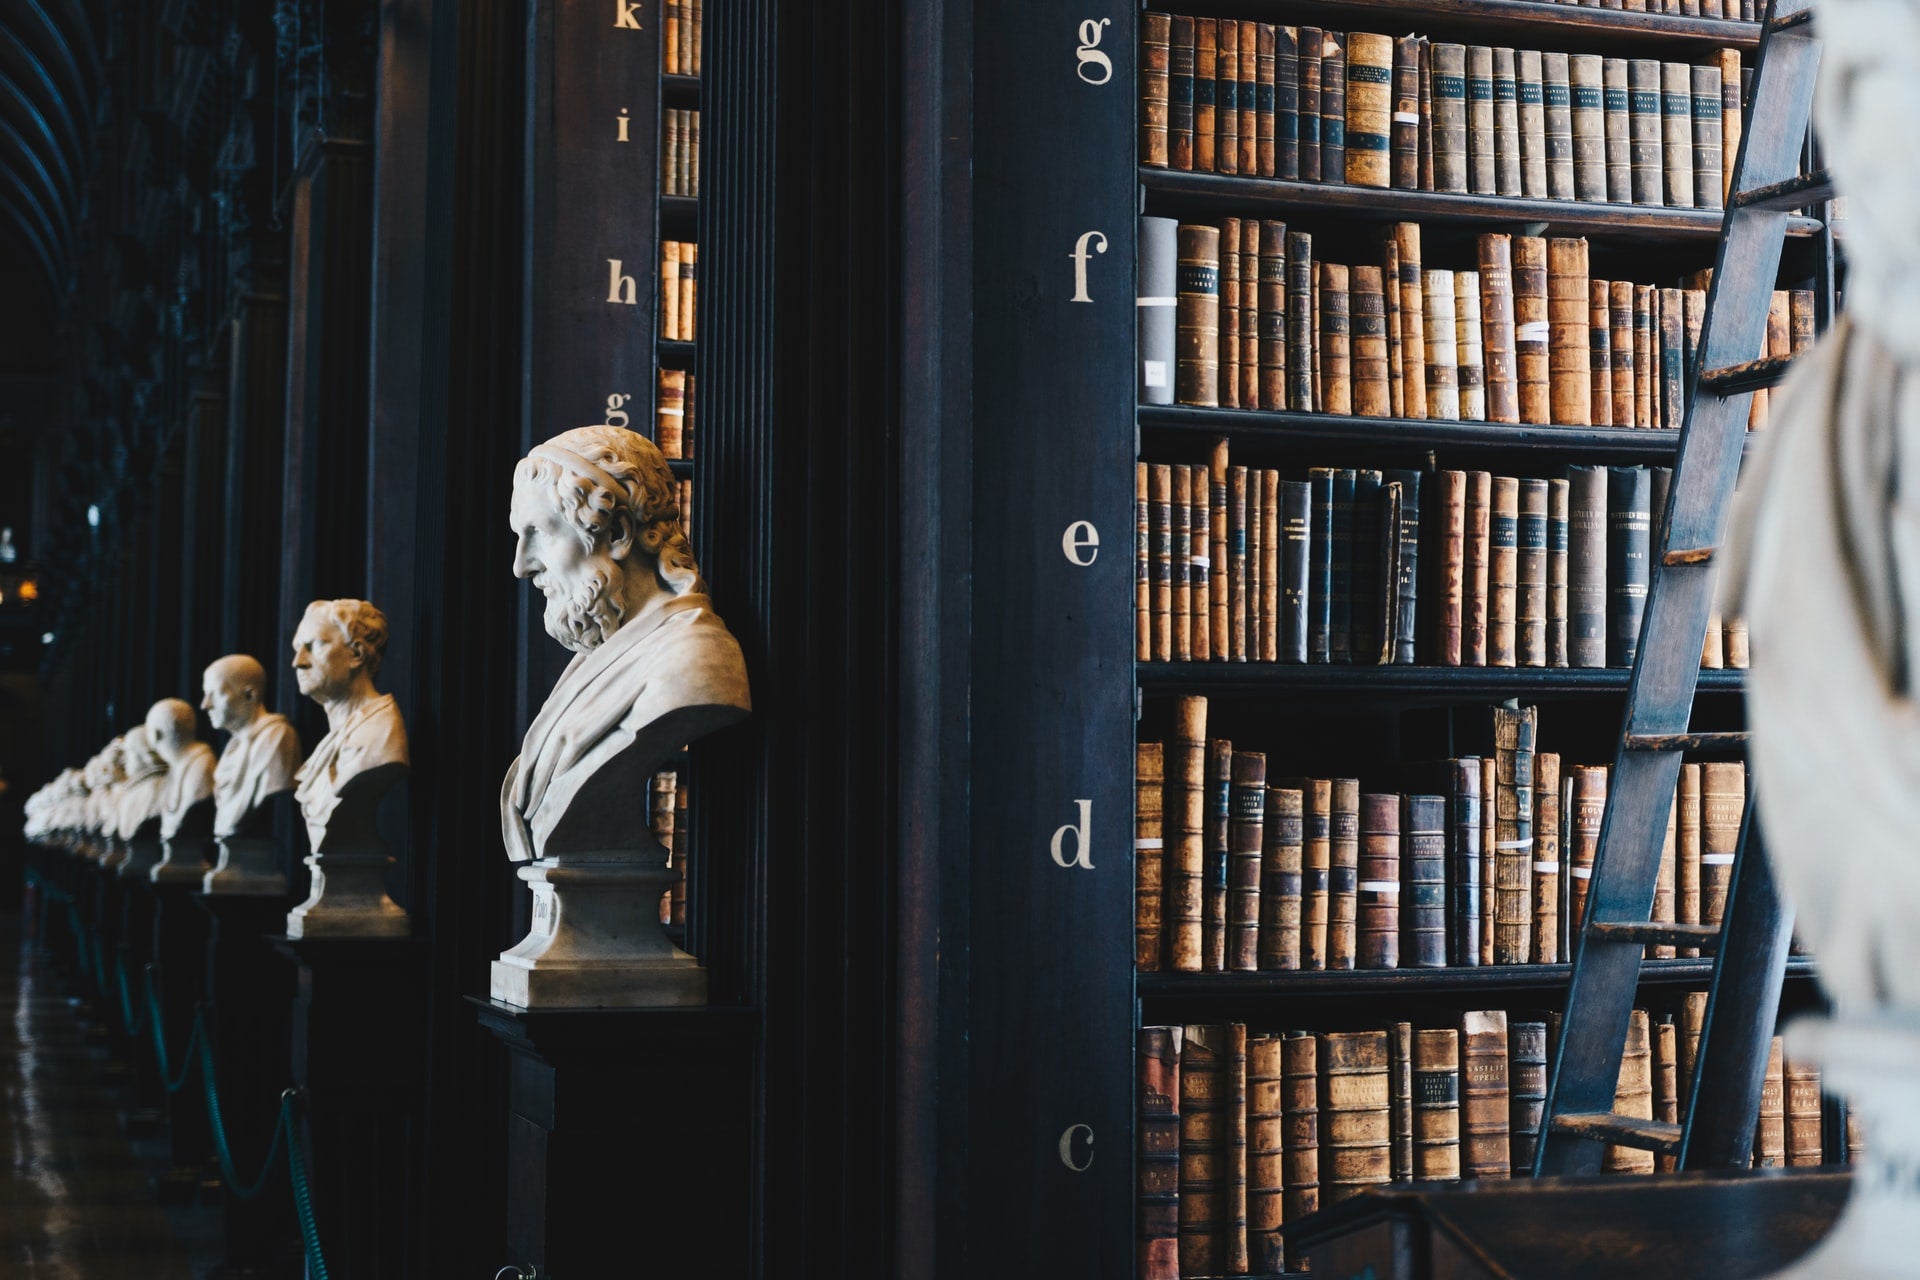 inside an old library with roman busts on display